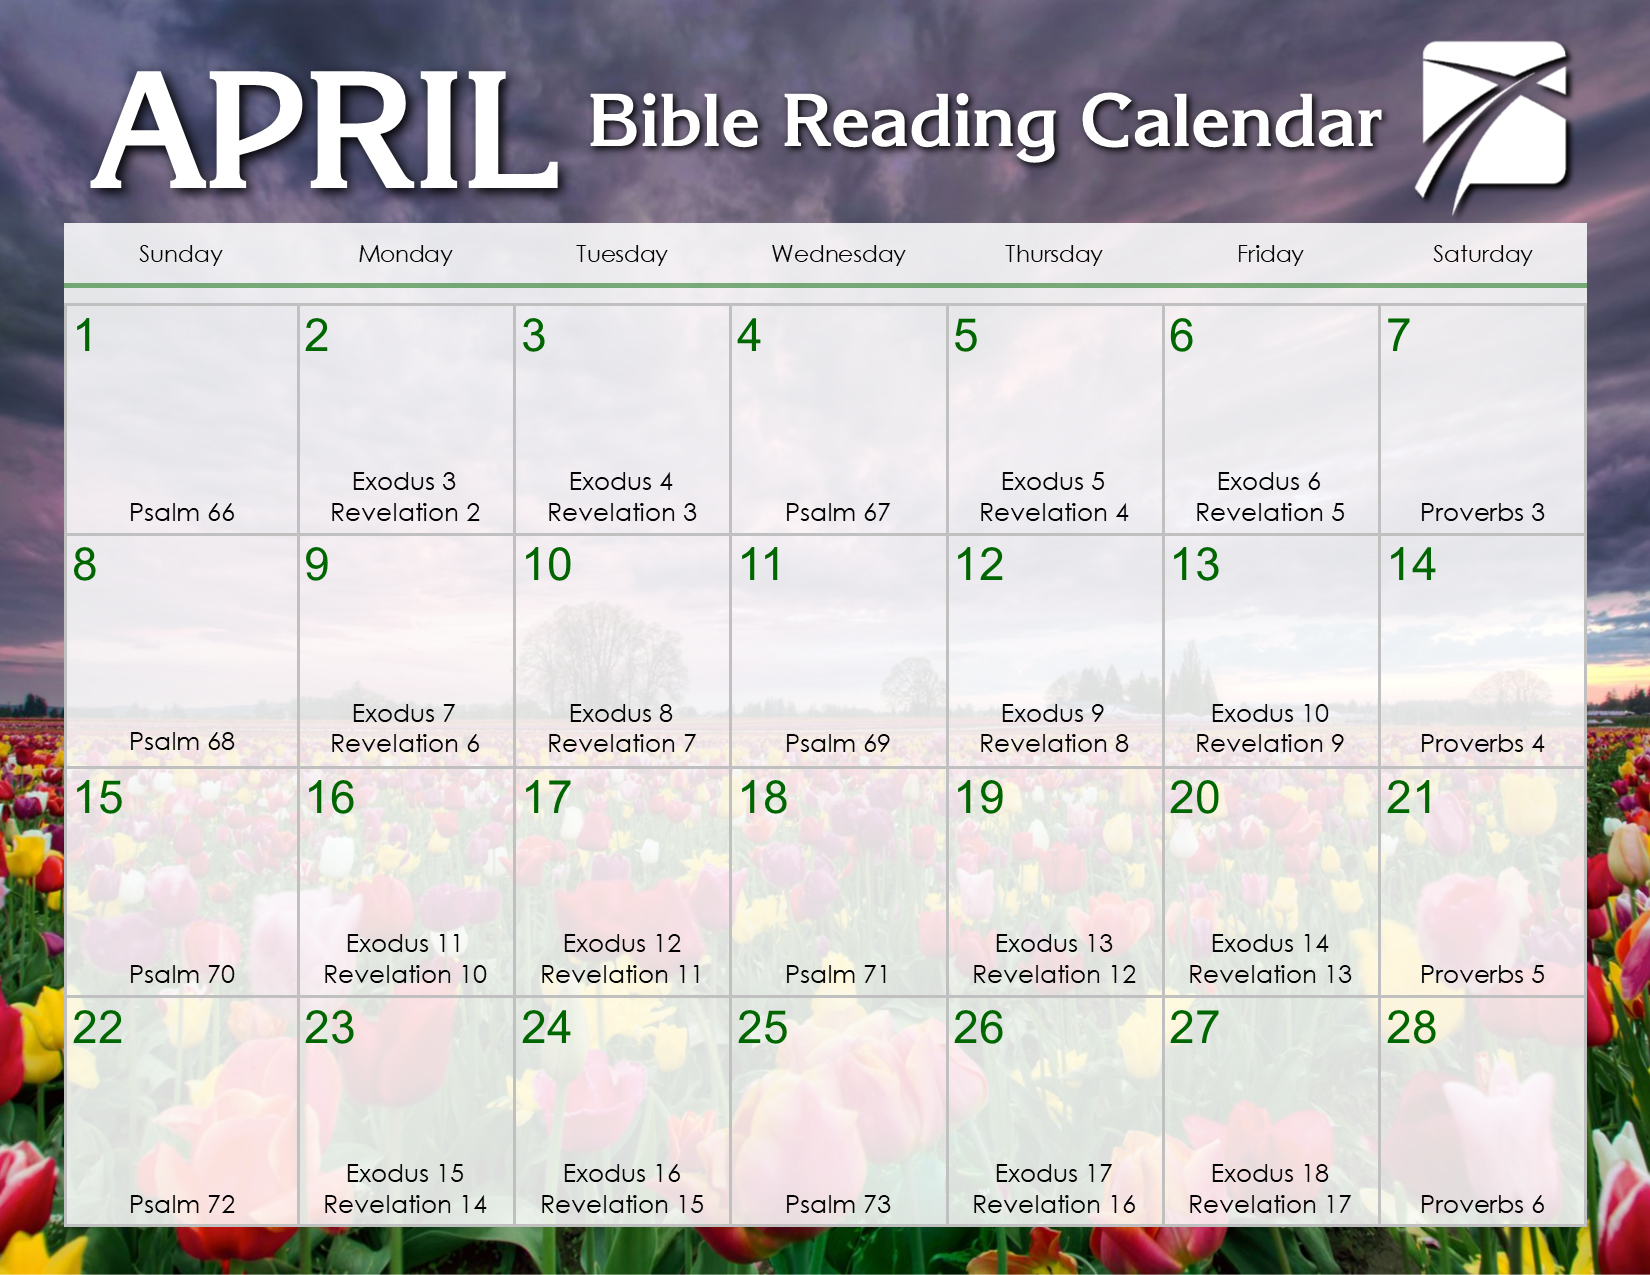 April 2018 Daily Bible Reading Calendar In God's Image